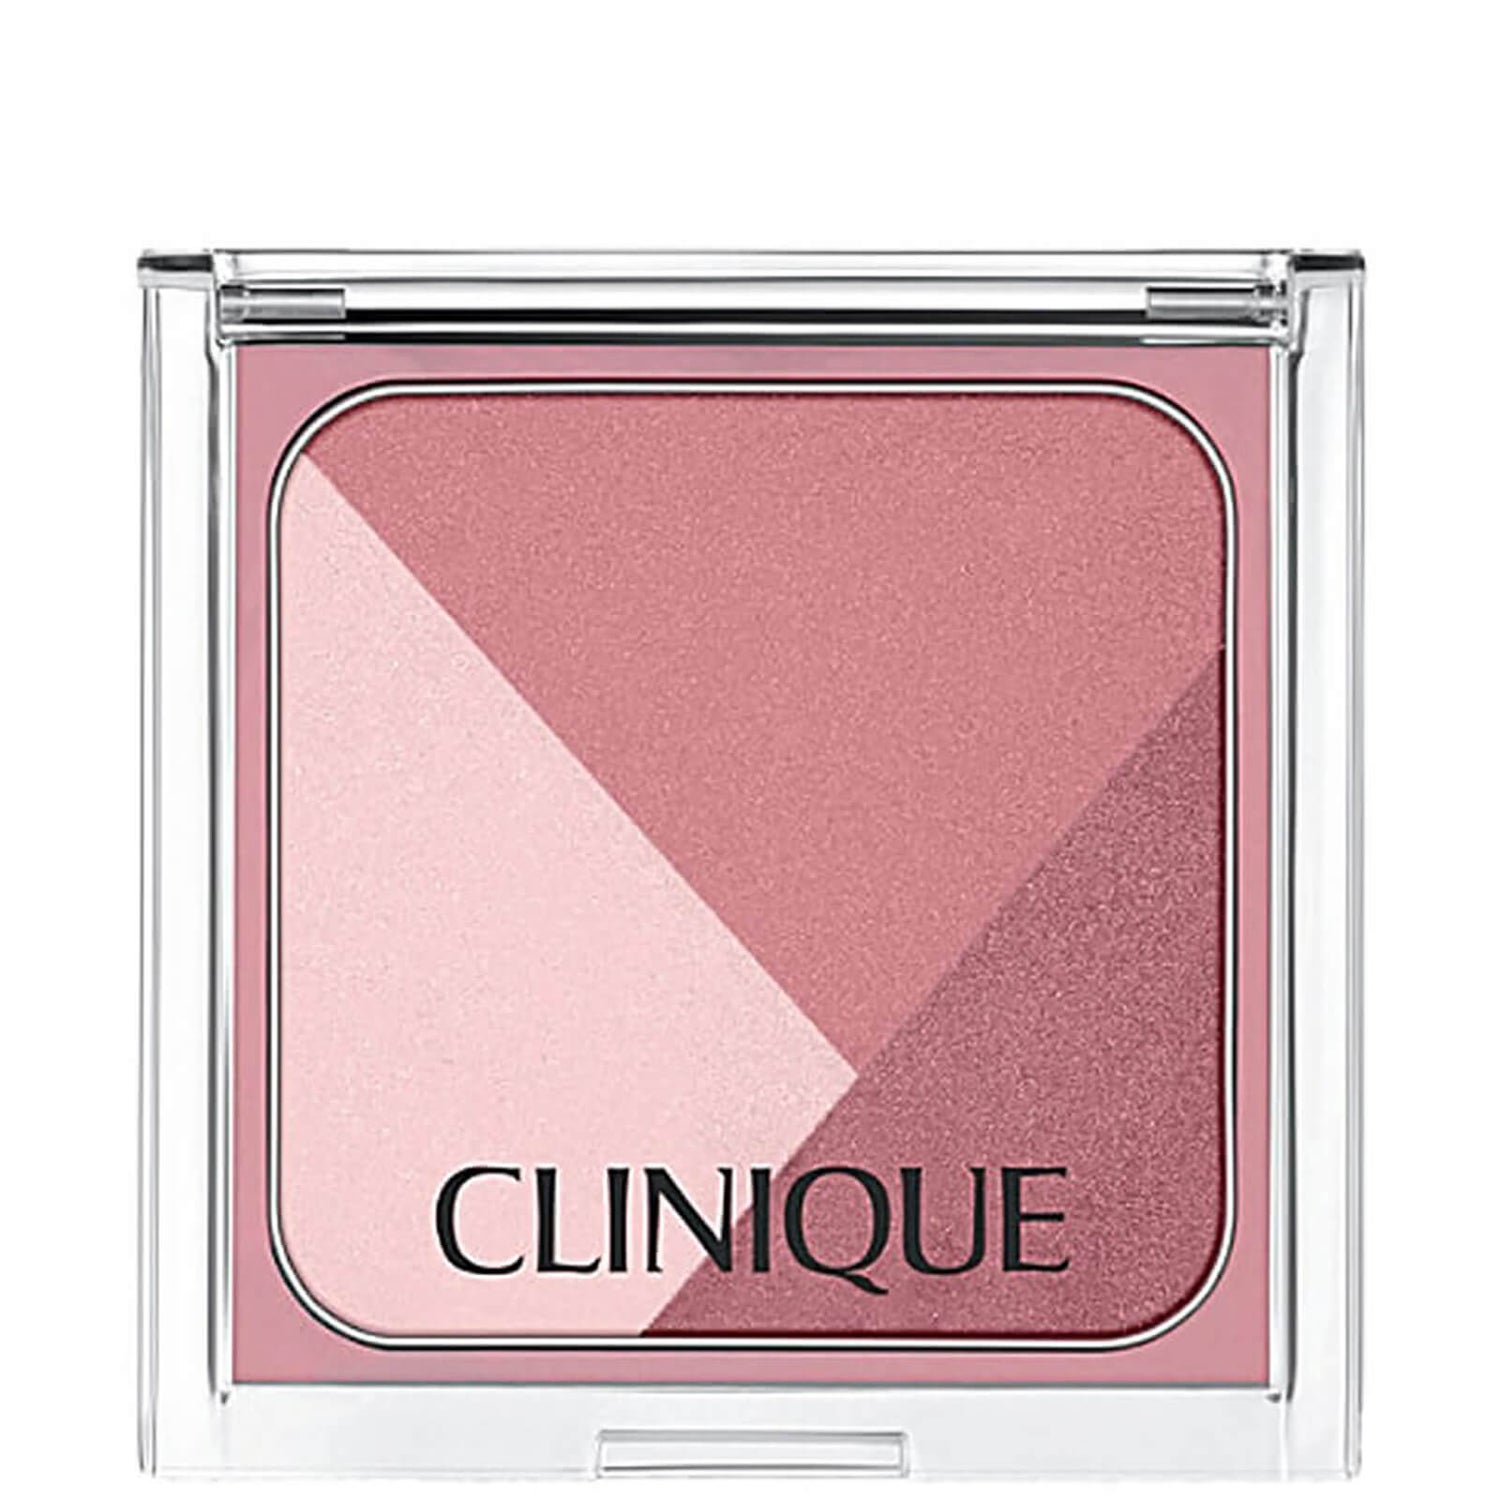 Clinique Sculptionary Cheek Contouring Palette -poskiväripaletti, Defining Berries